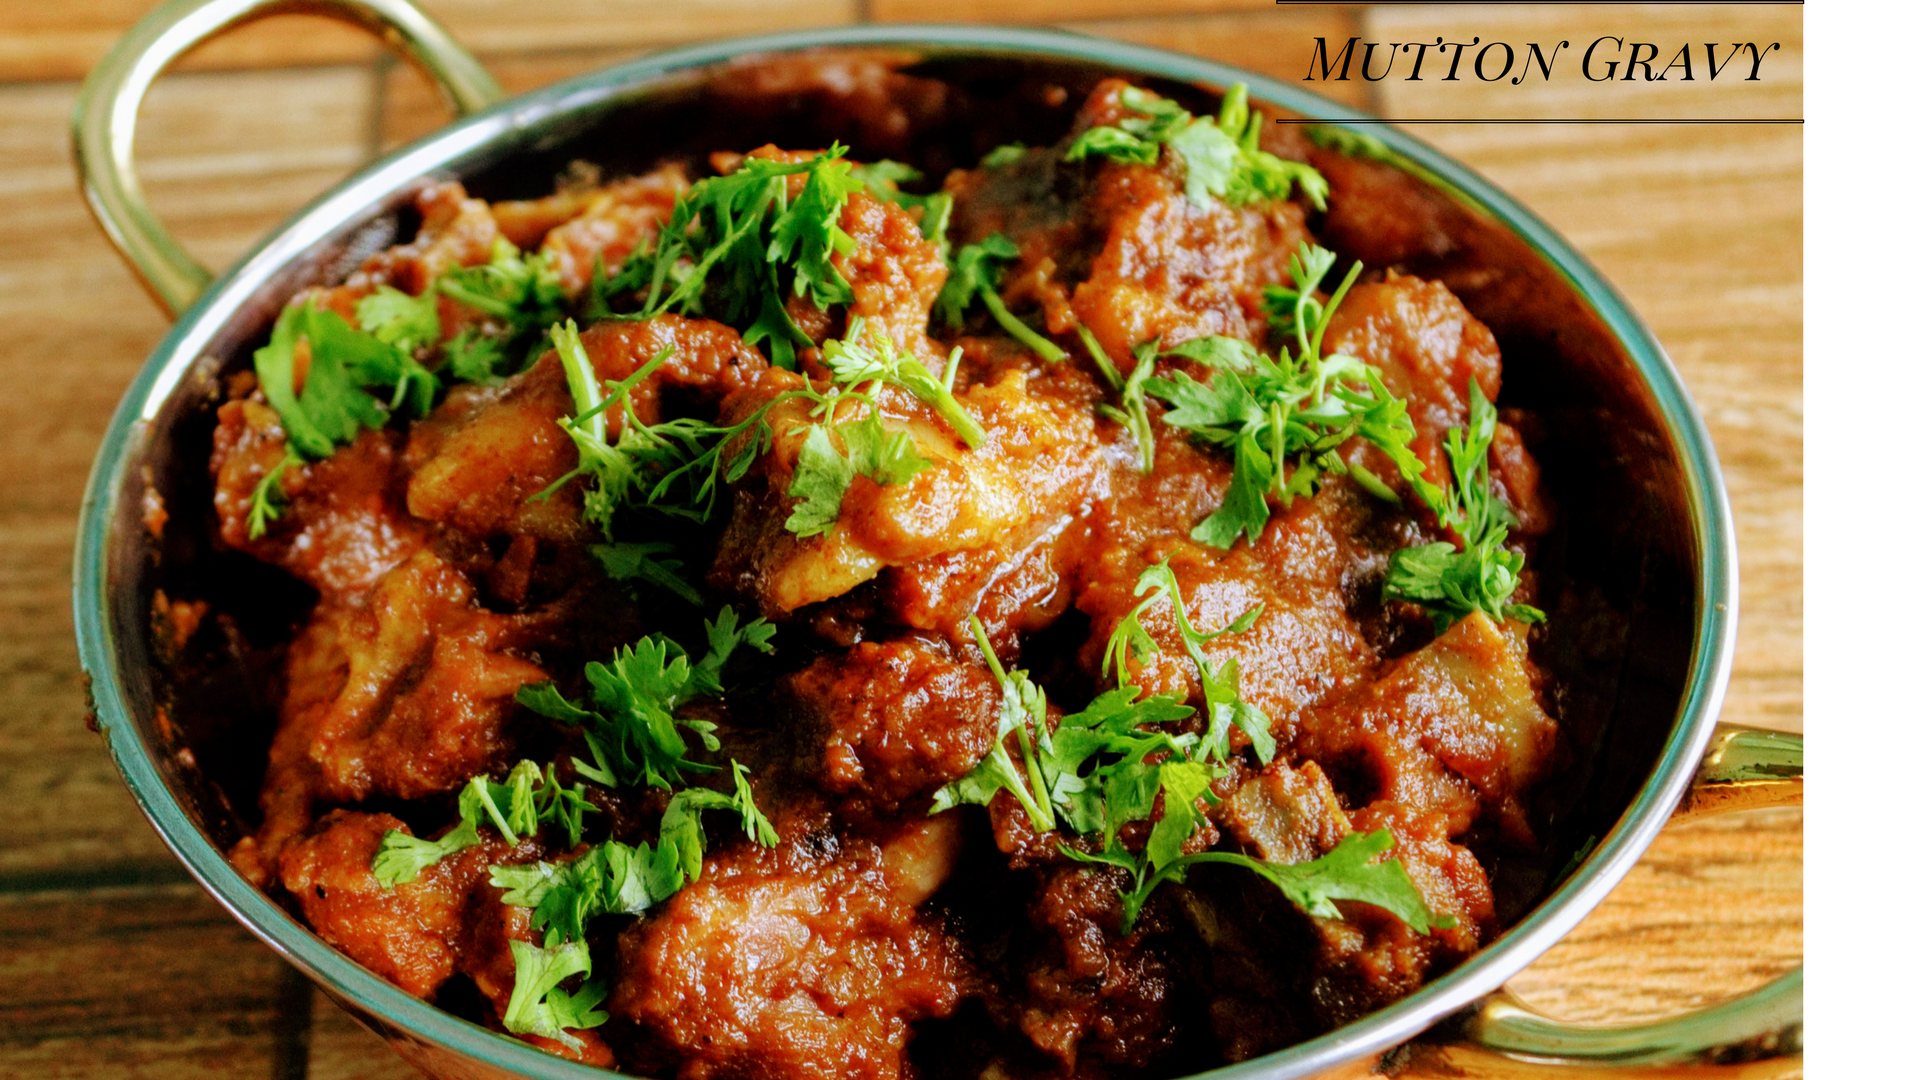 600 Mutton Curry Stock Photos HighRes Pictures and Images  Getty Images